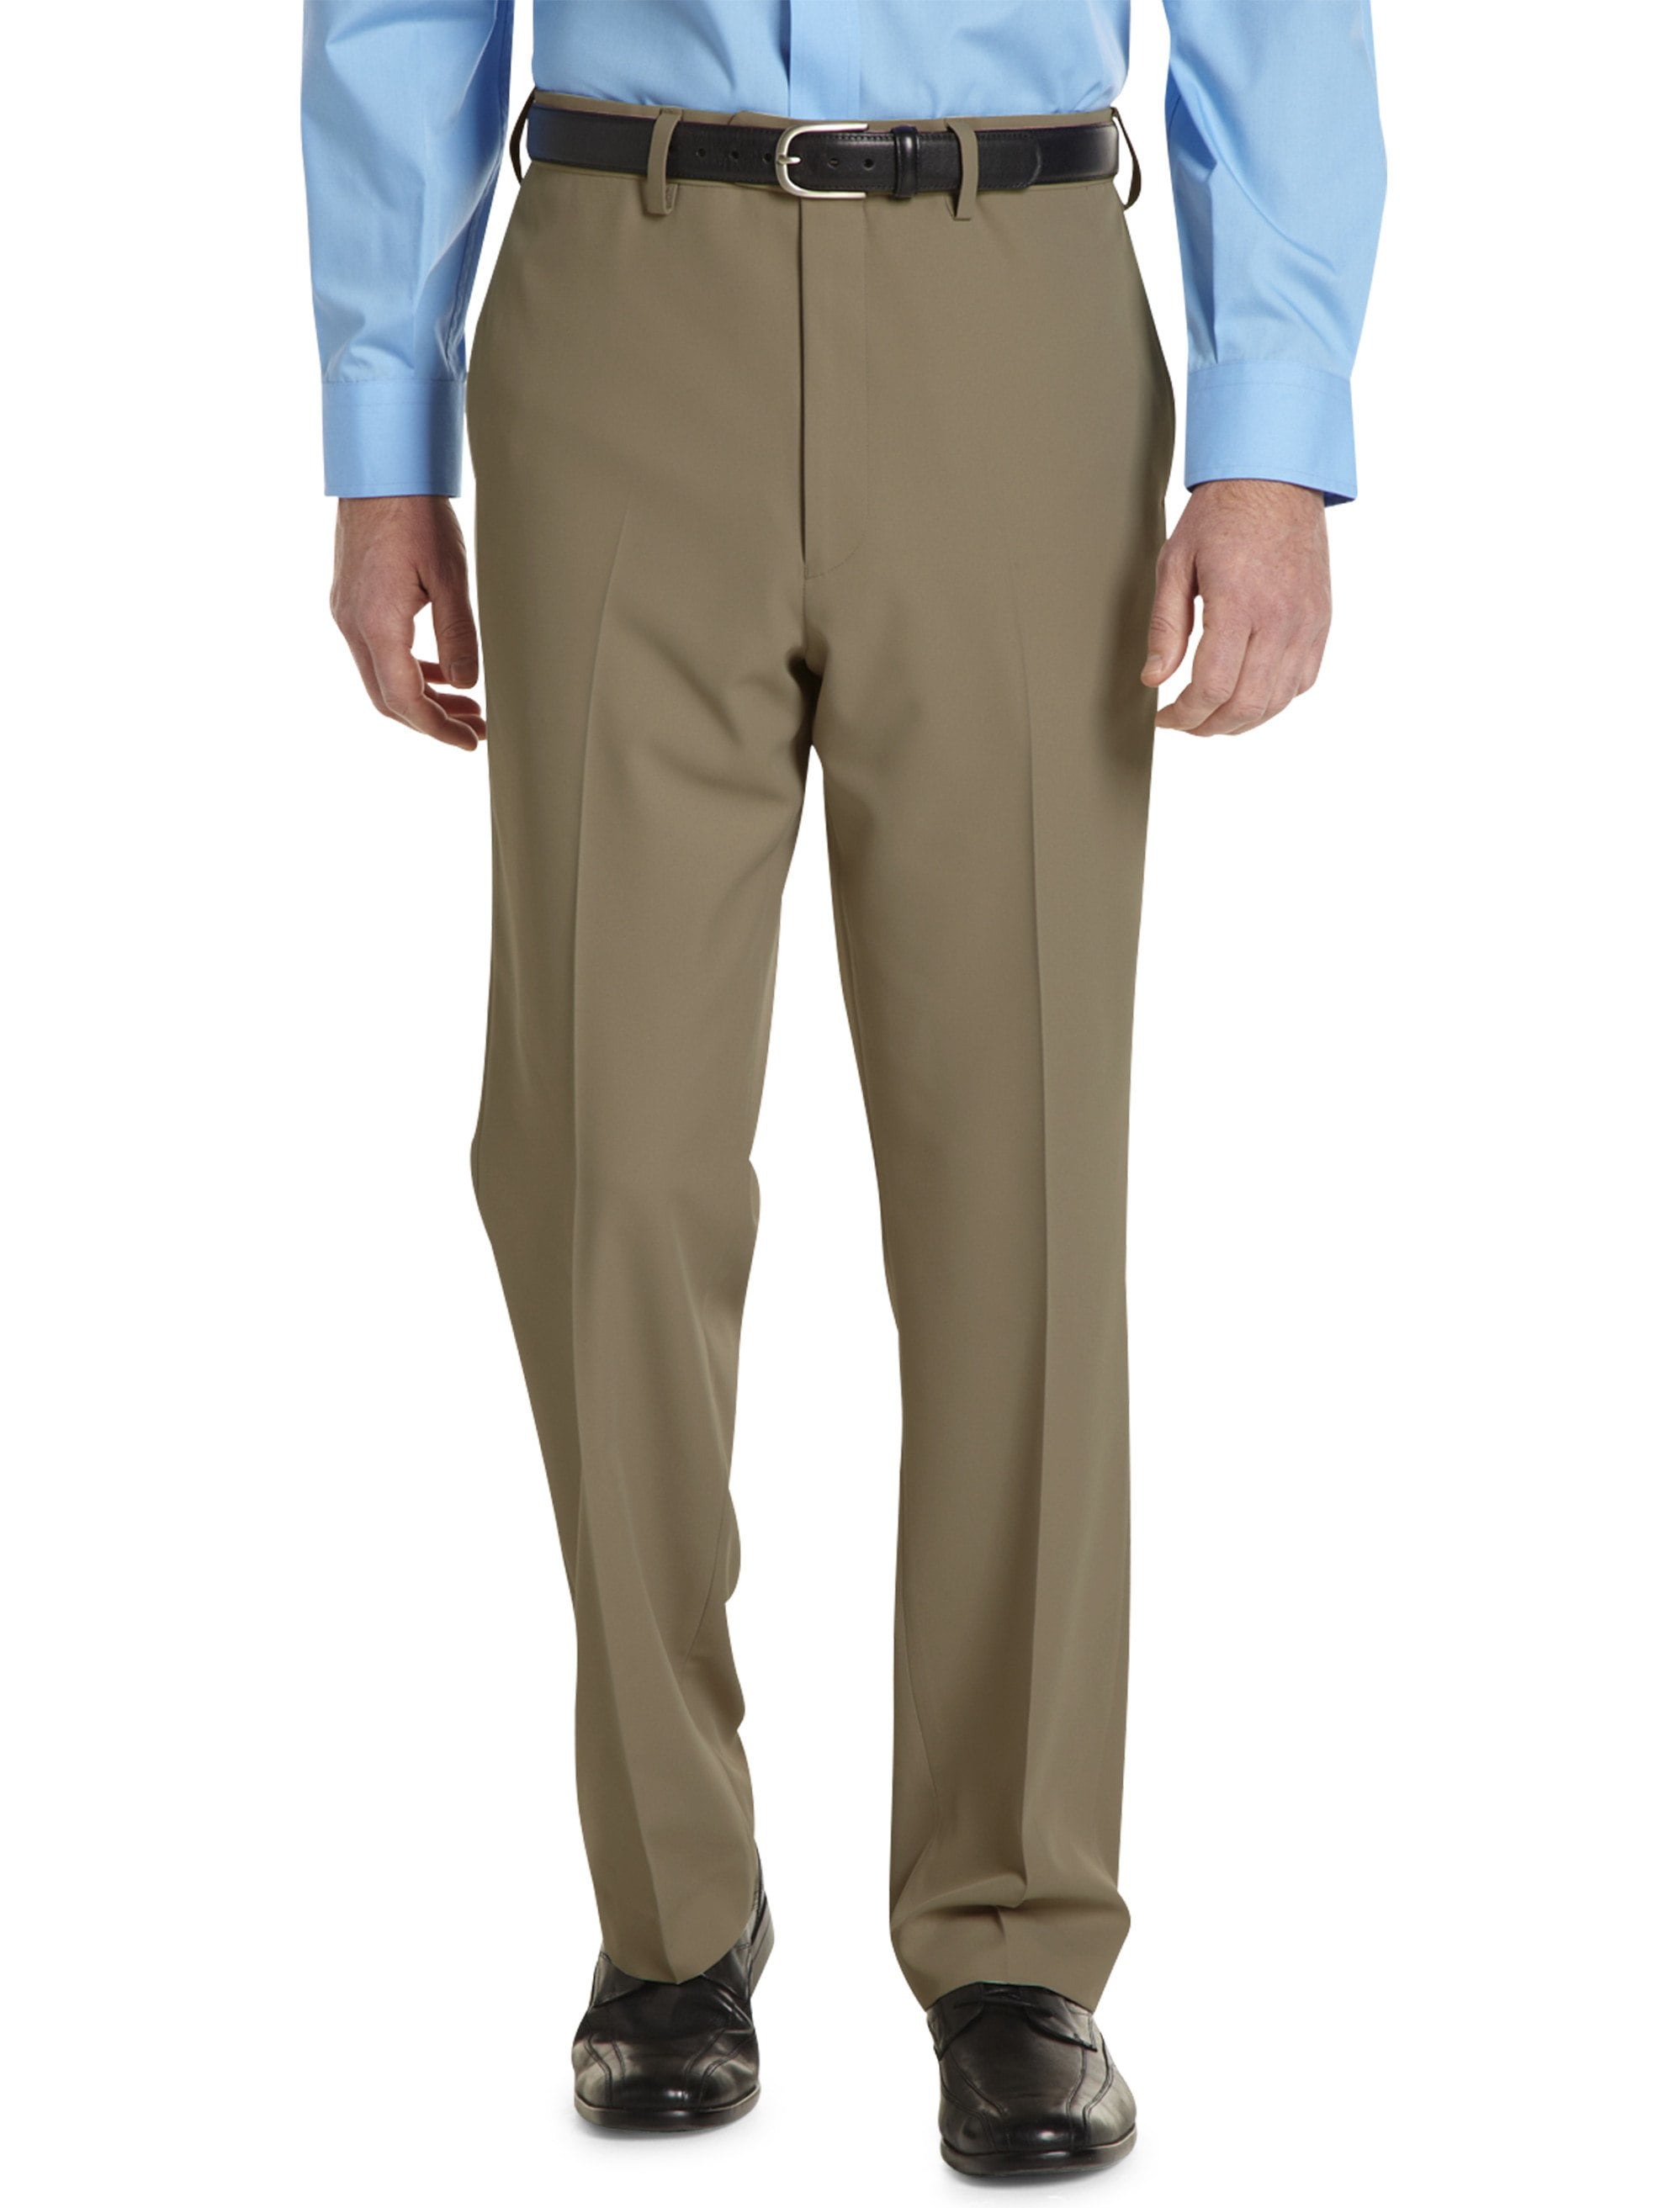 Gold Series by DXL Big and Tall Continuous Comfort Flat-Front Pants 